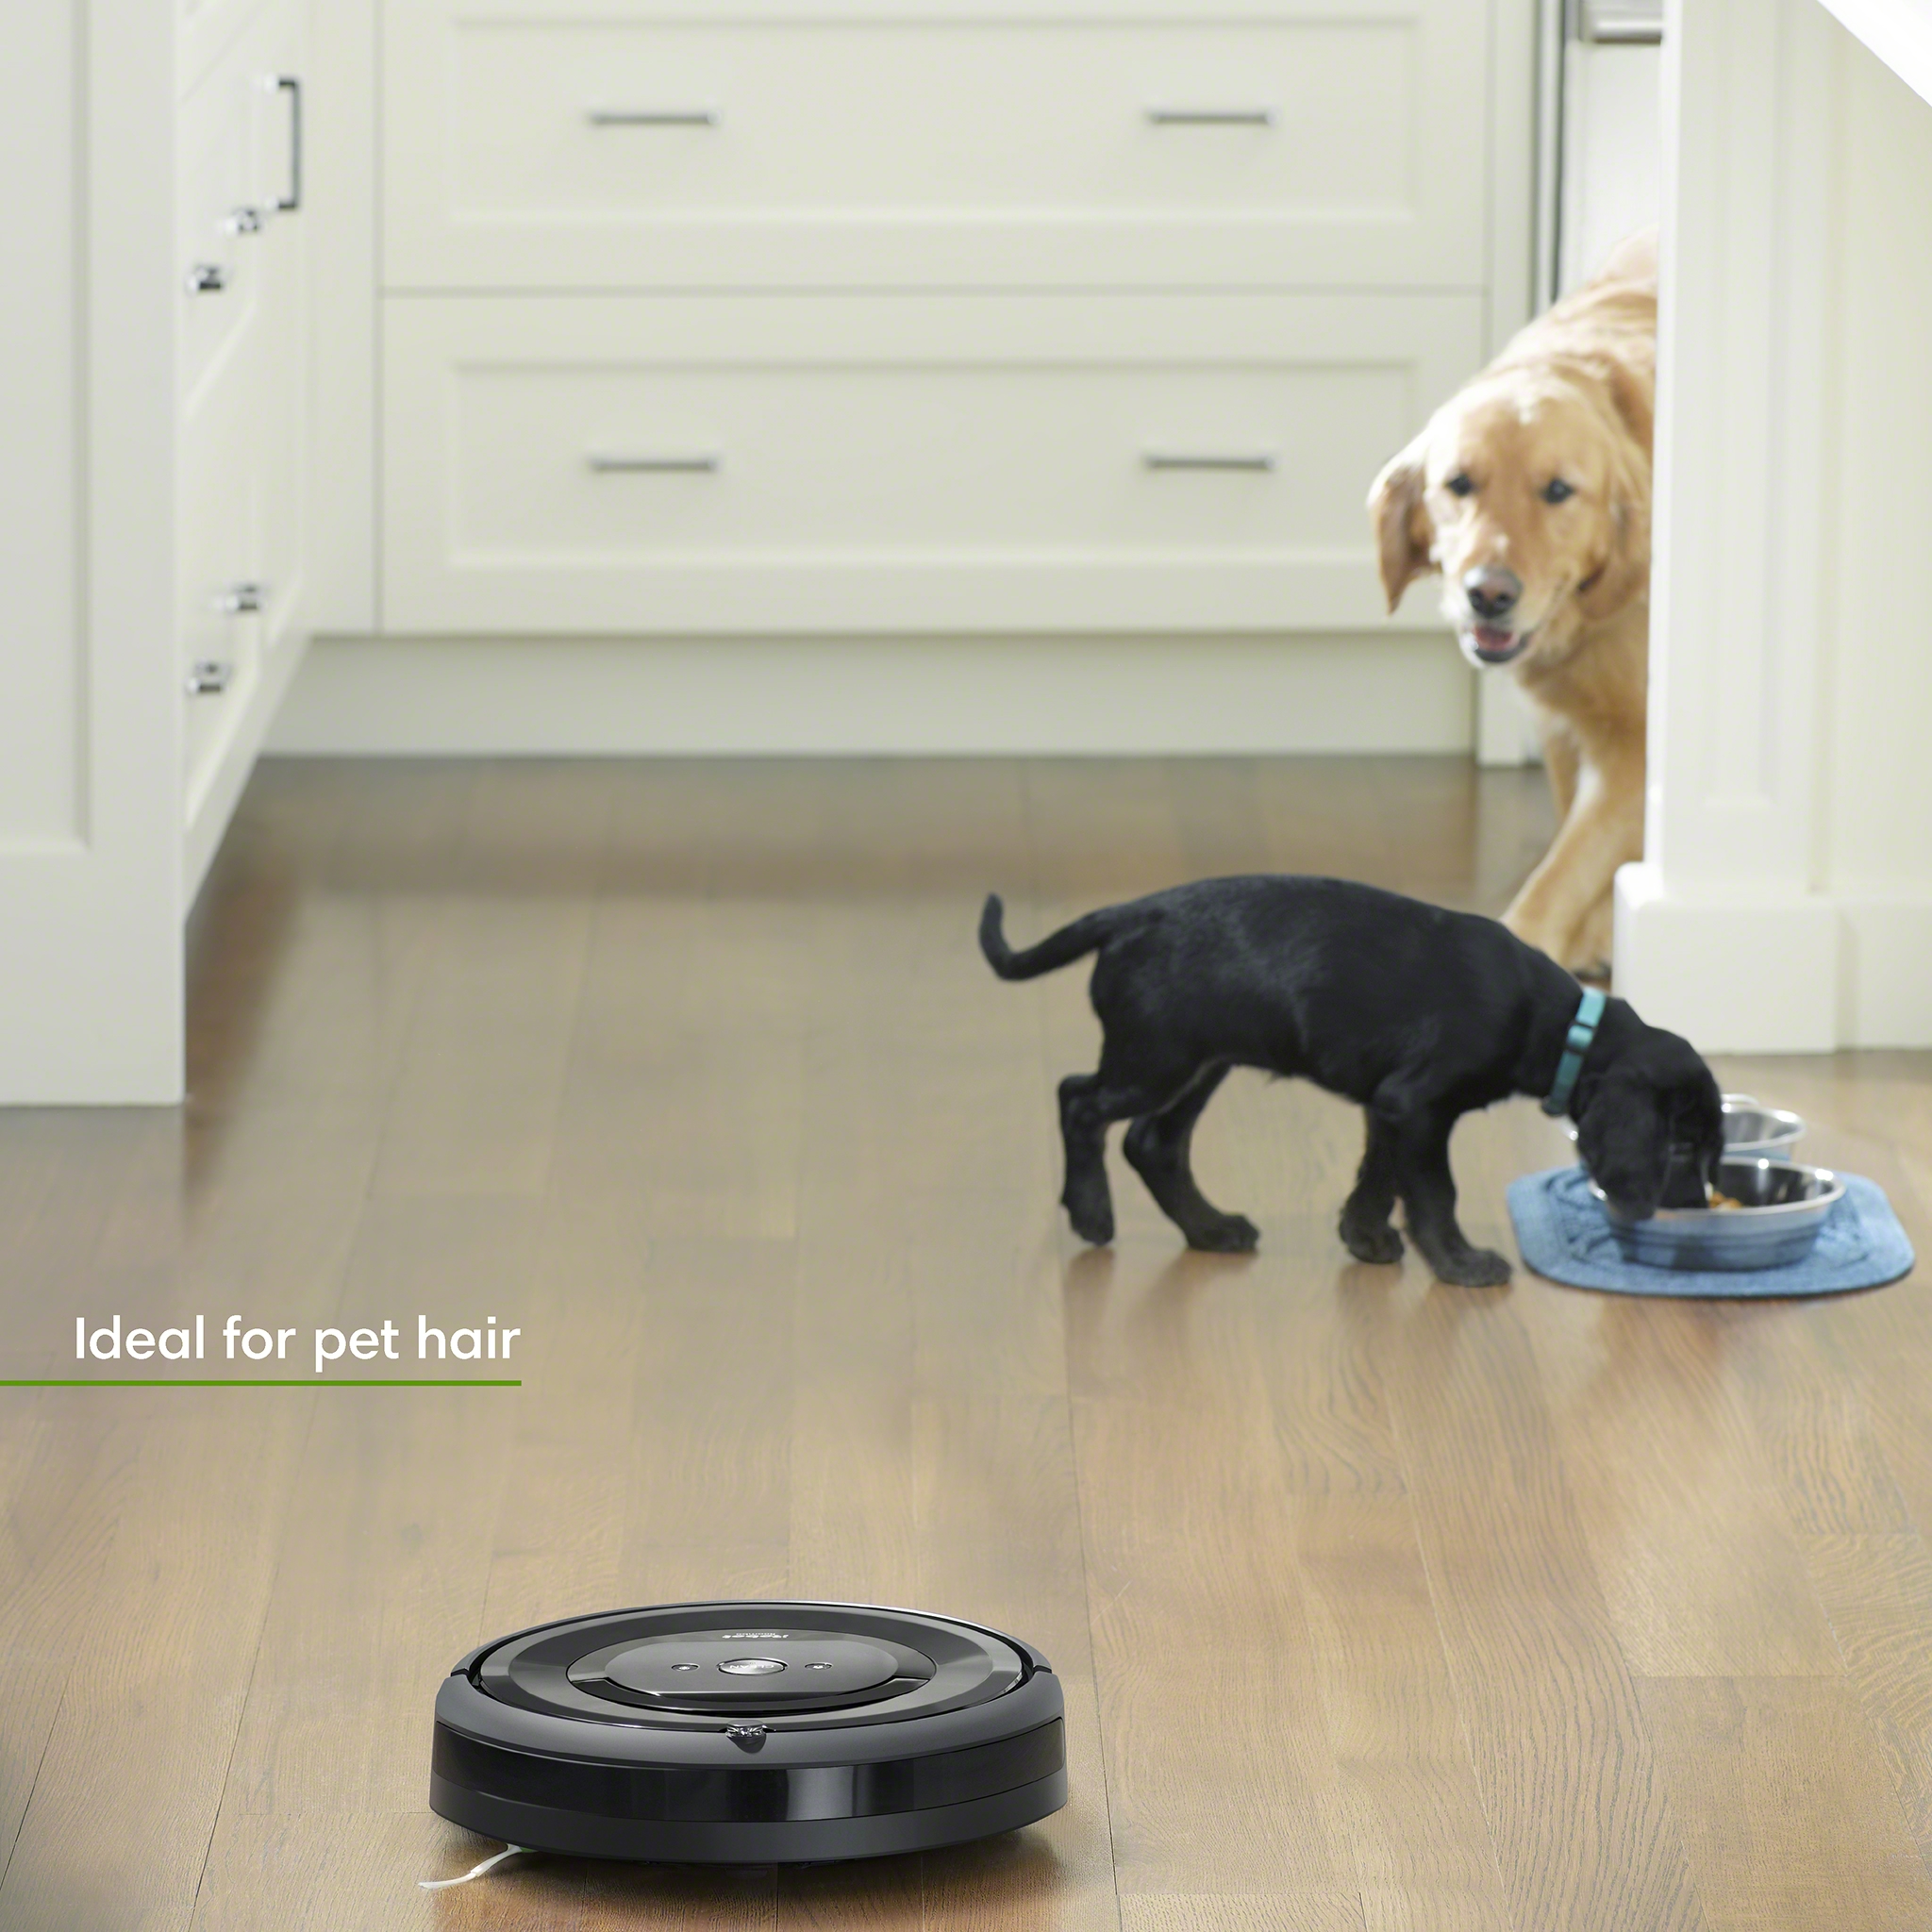 iRobot Roomba e6 (6134) Wi-Fi Connected Robot Vacuum - Wi-Fi Connected, Works with Google, Ideal for Pet Hair, Carpets, Hard, Self-Charging Robotic Vacuum - image 6 of 15